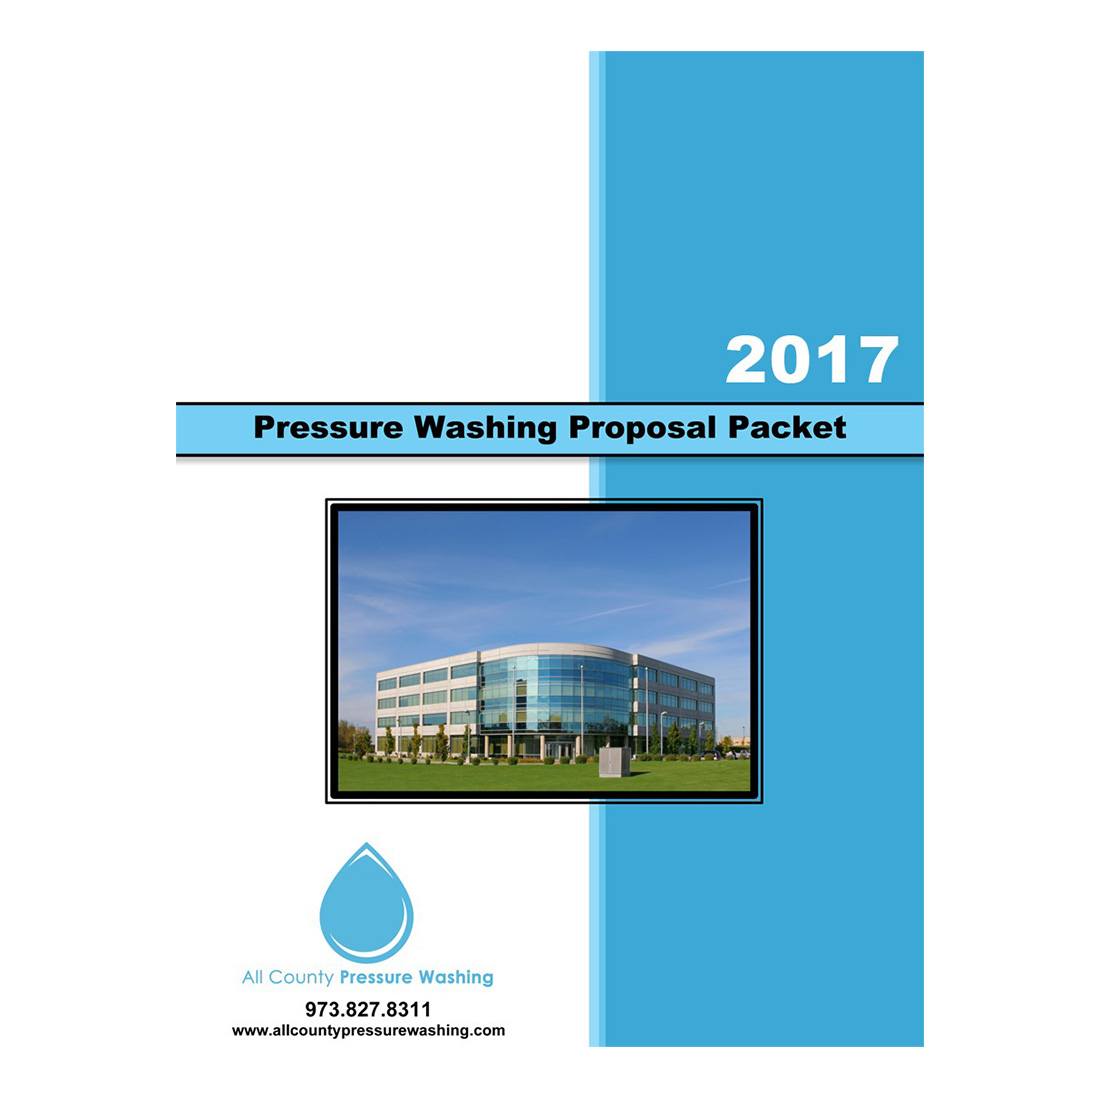 Proposal Manager - Pressure Washing Porposal Packet Front View